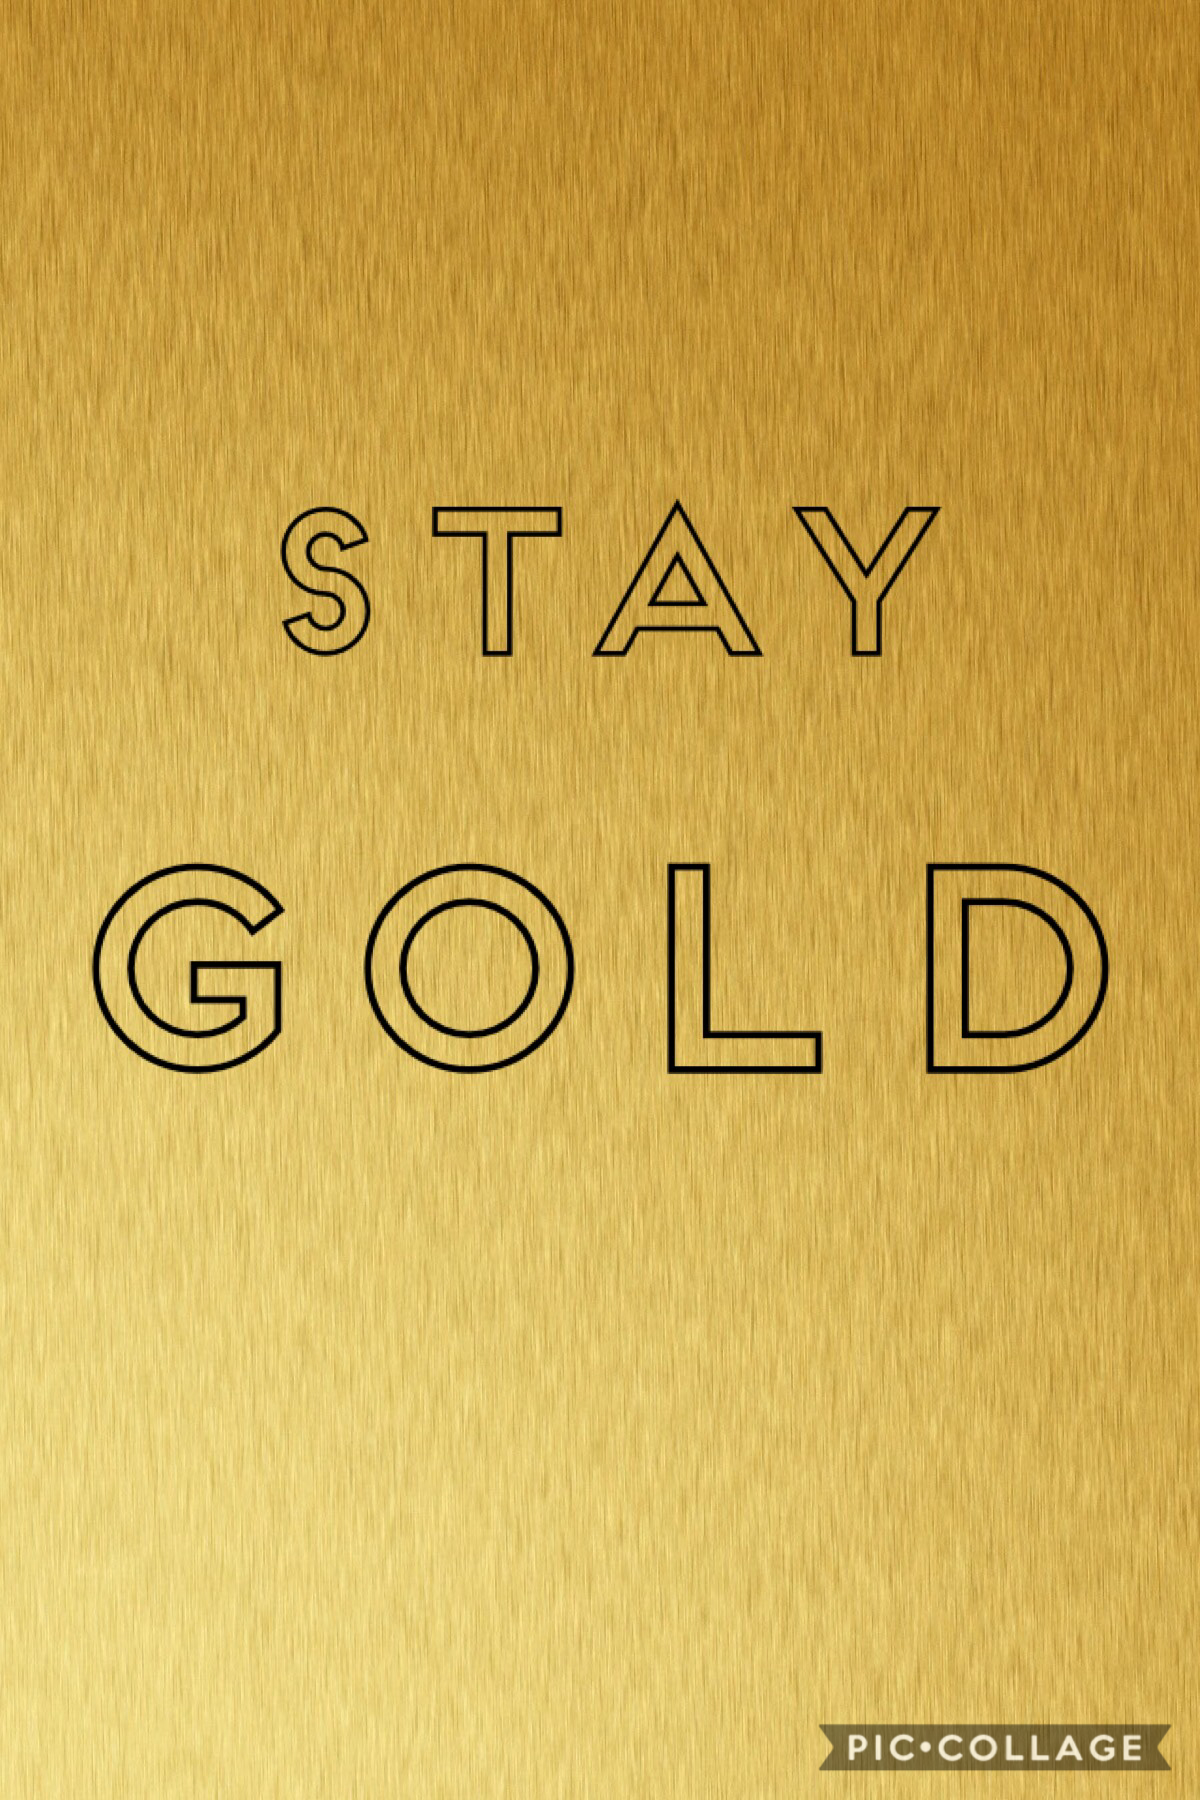 Stay gold